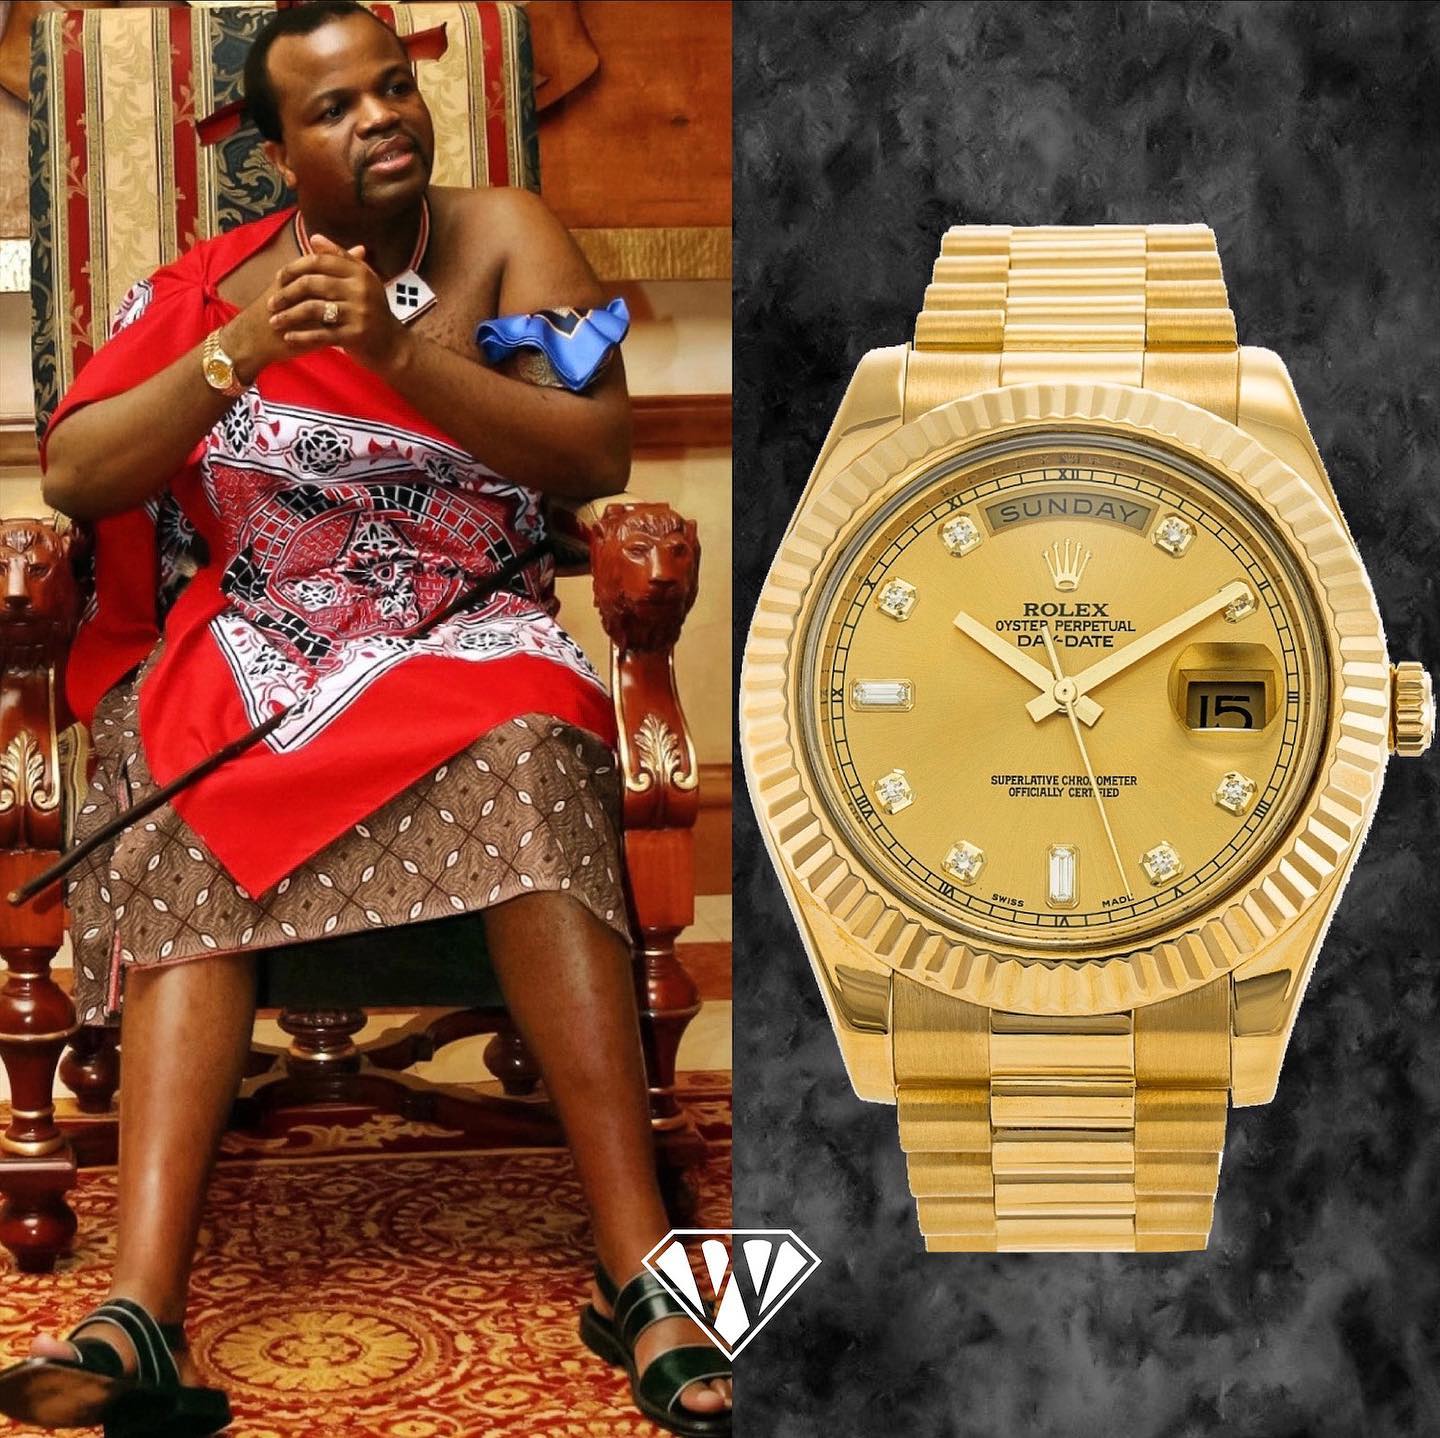 King of Swaziland – Rolex Day-Date Gold 